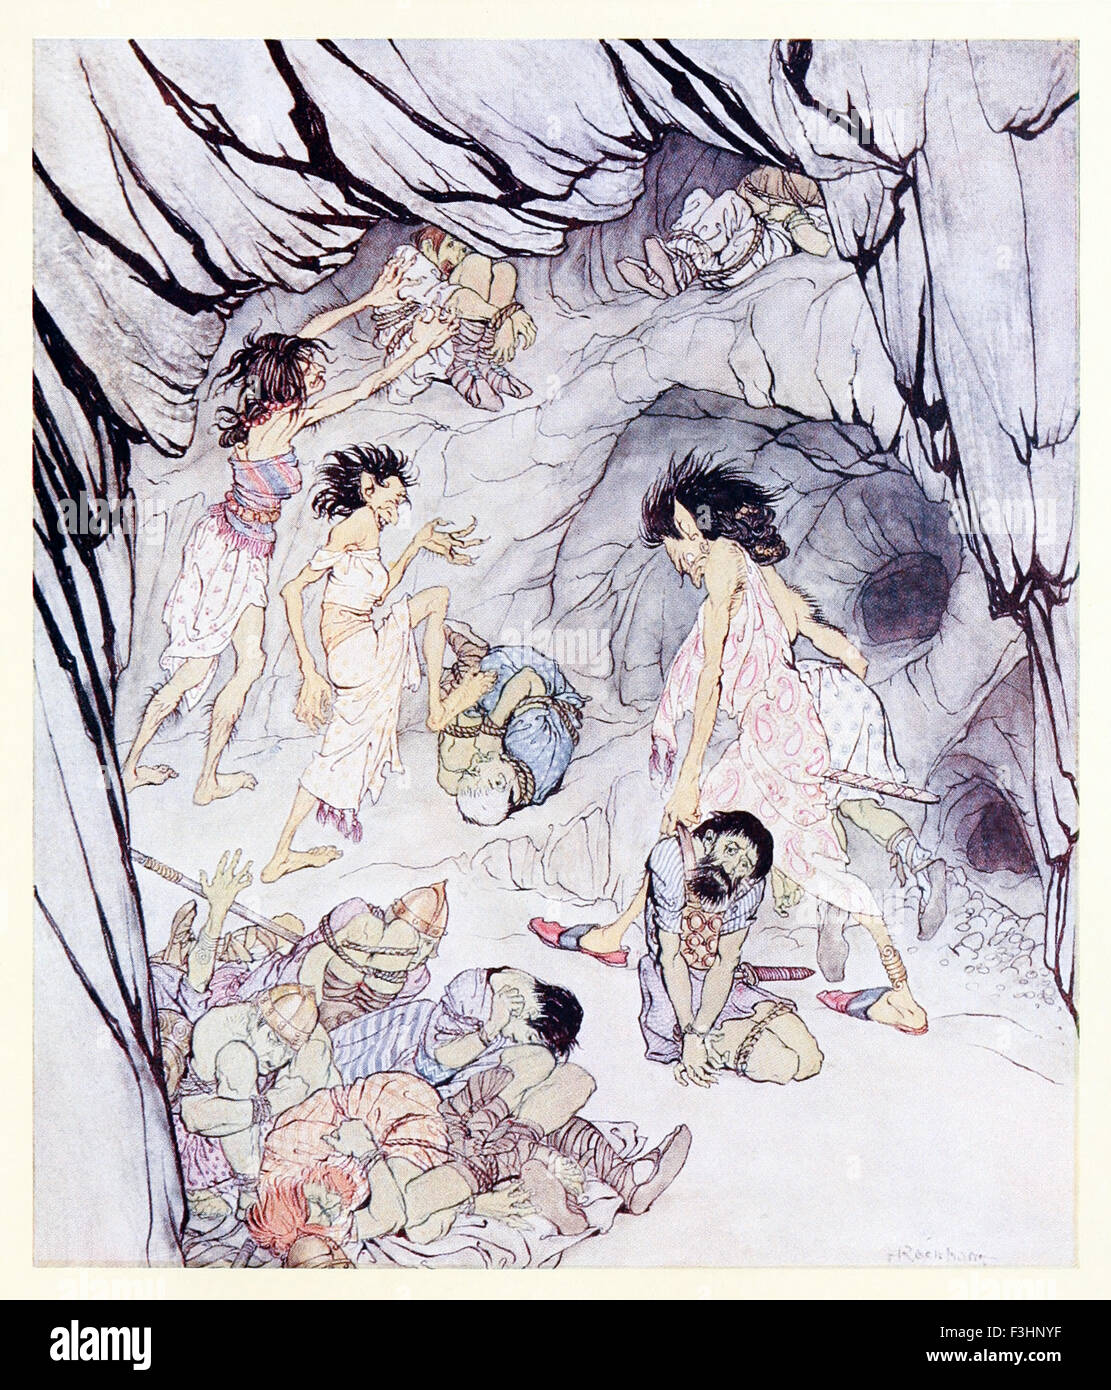 'This one is fat,' said Cullen, and she rolled a bulky Fenian along like at wheel' from 'The Enchanted Cave of Cesh Corran' in 'Irish Fairy Tales', illustration by Arthur Rackham (1867-1939). See description for more information. Stock Photo